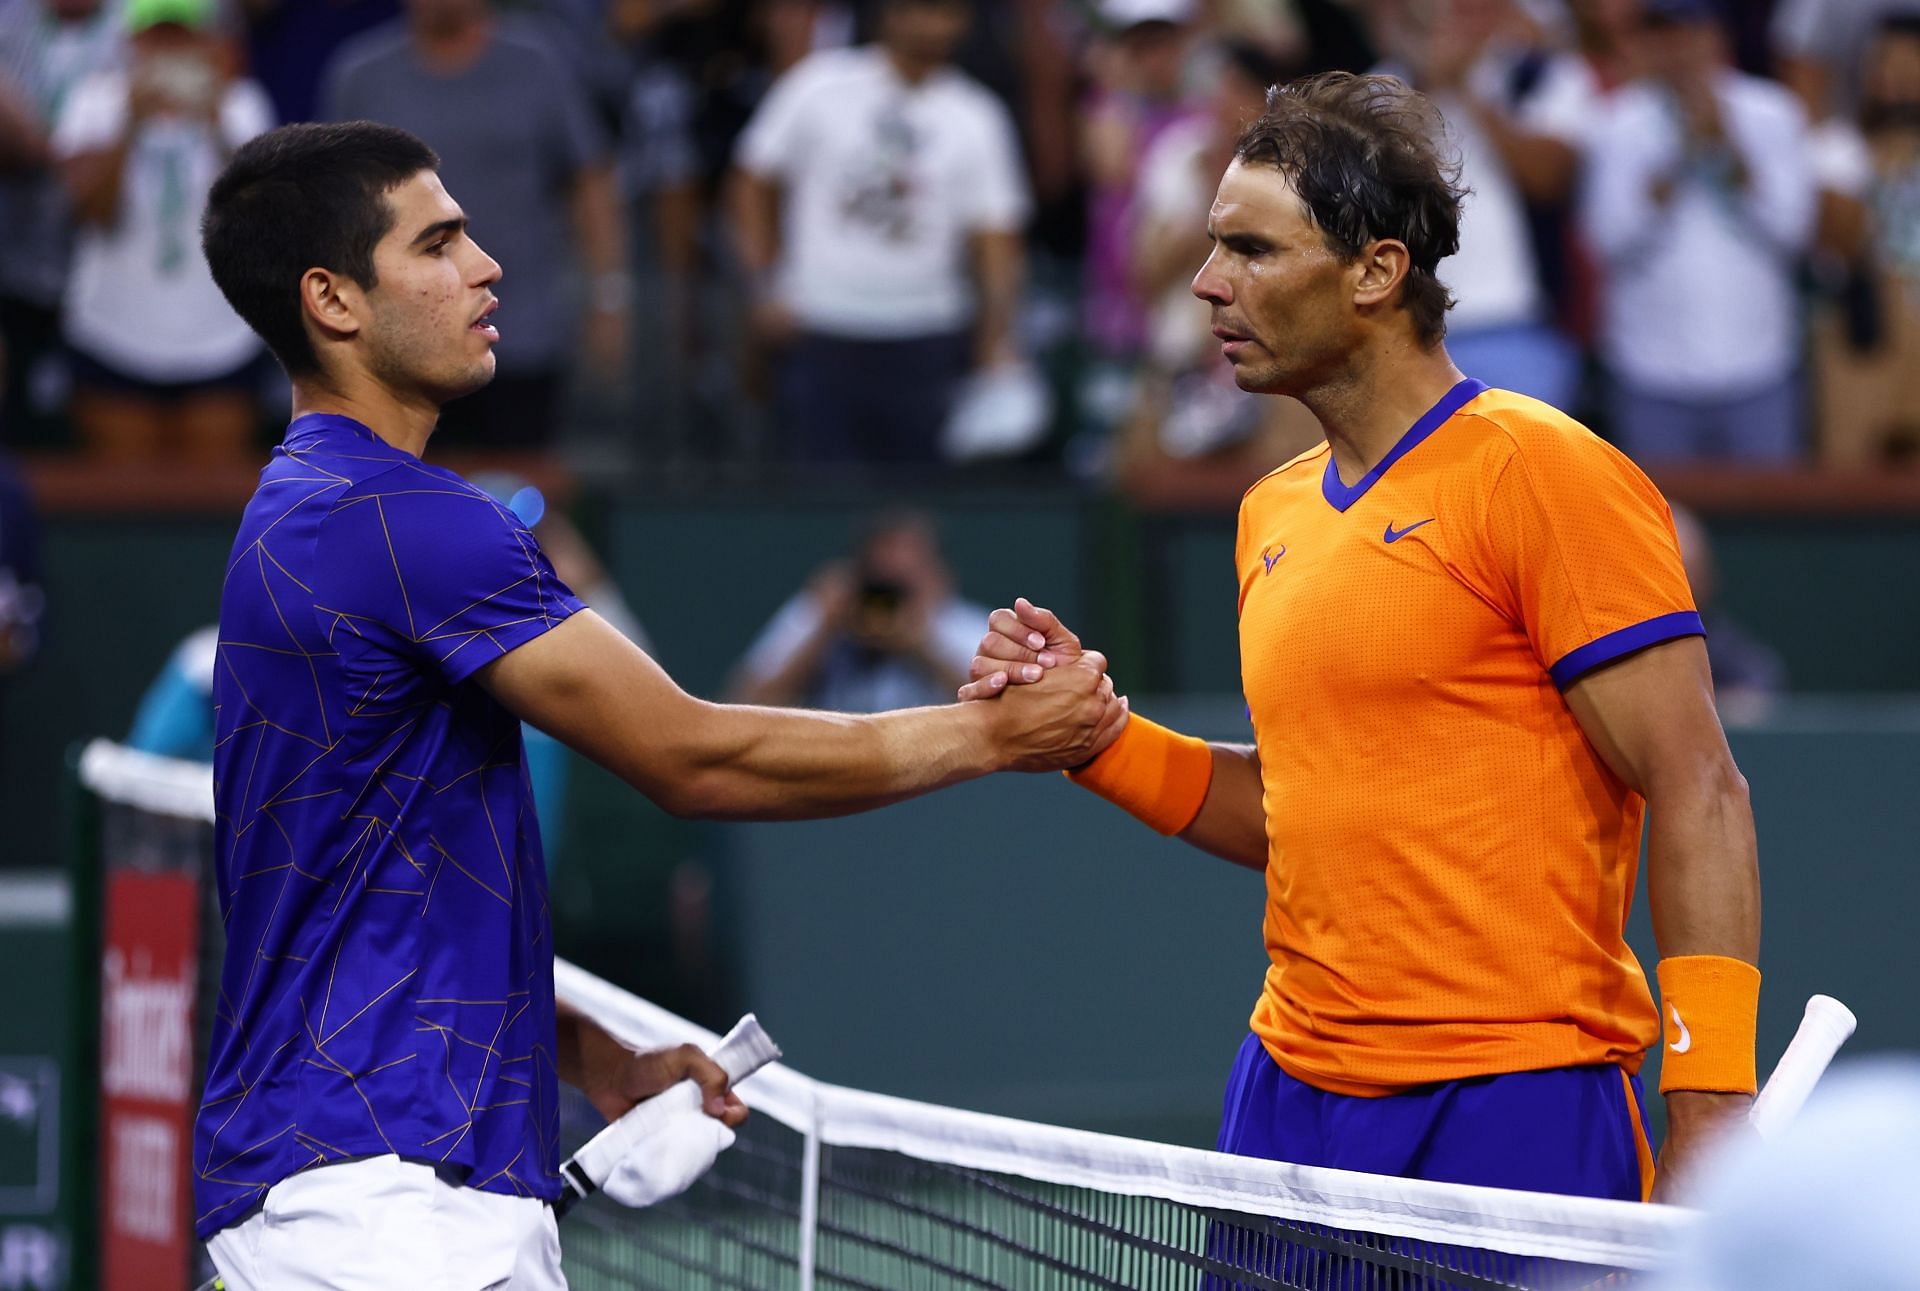 Carlos Alcaraz and Rafael Nadal shake hands after their match at the 2022 Indian Wells Masters